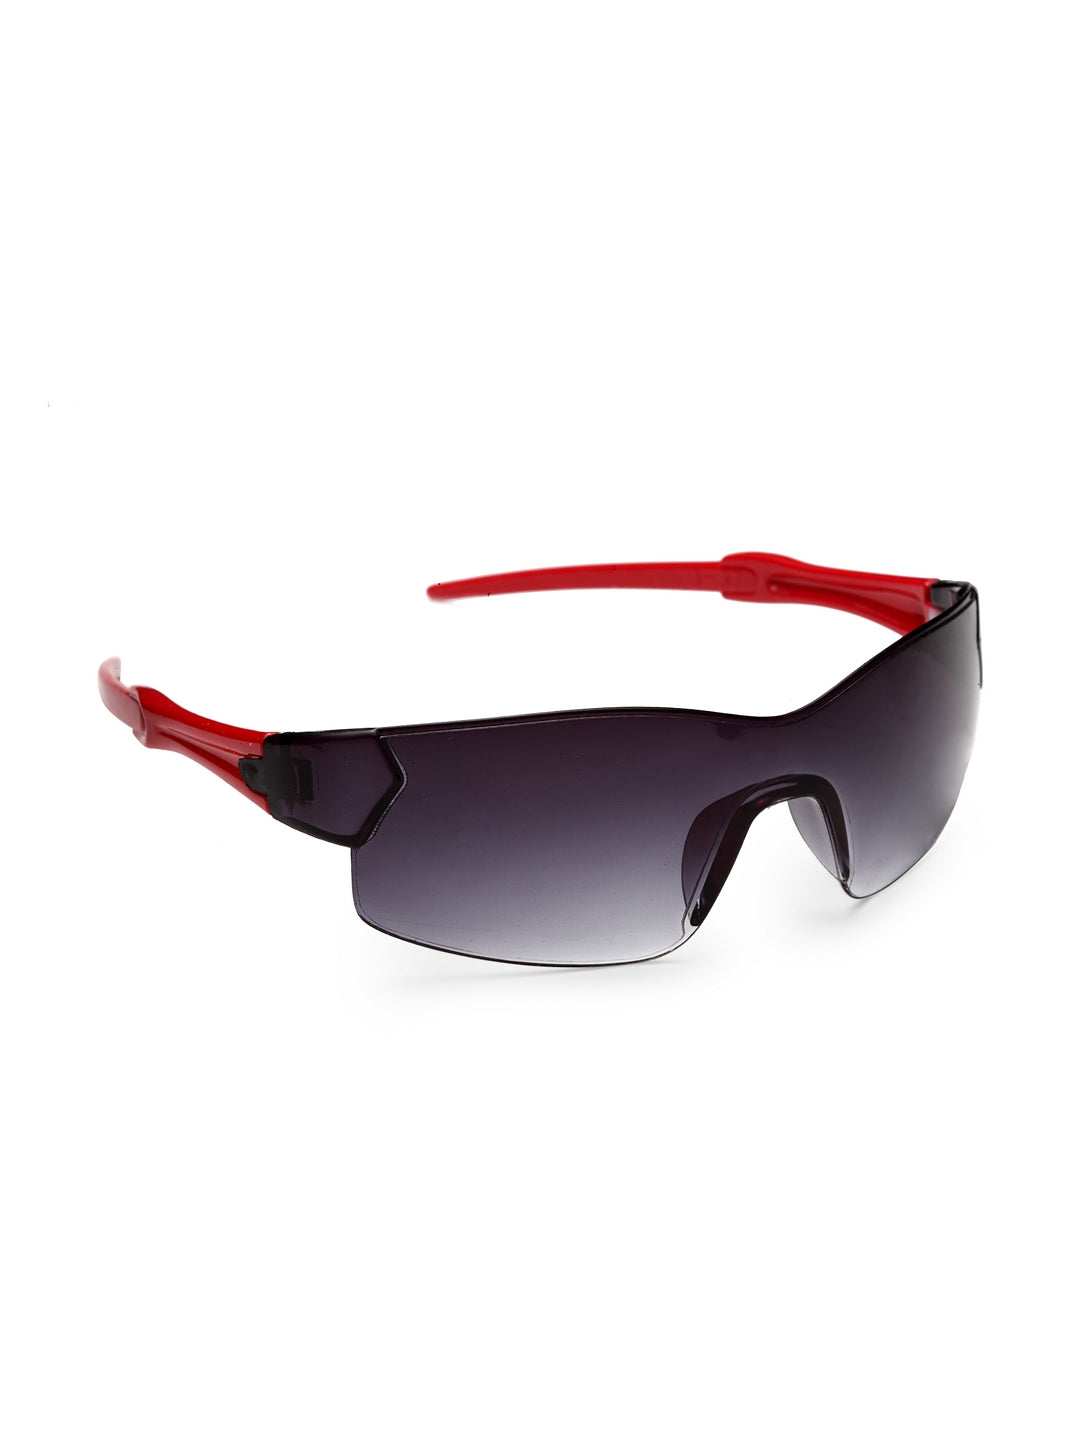 Stol'n Unisex Polarized UV-Protected Sports Sunglasses for Kids - Red